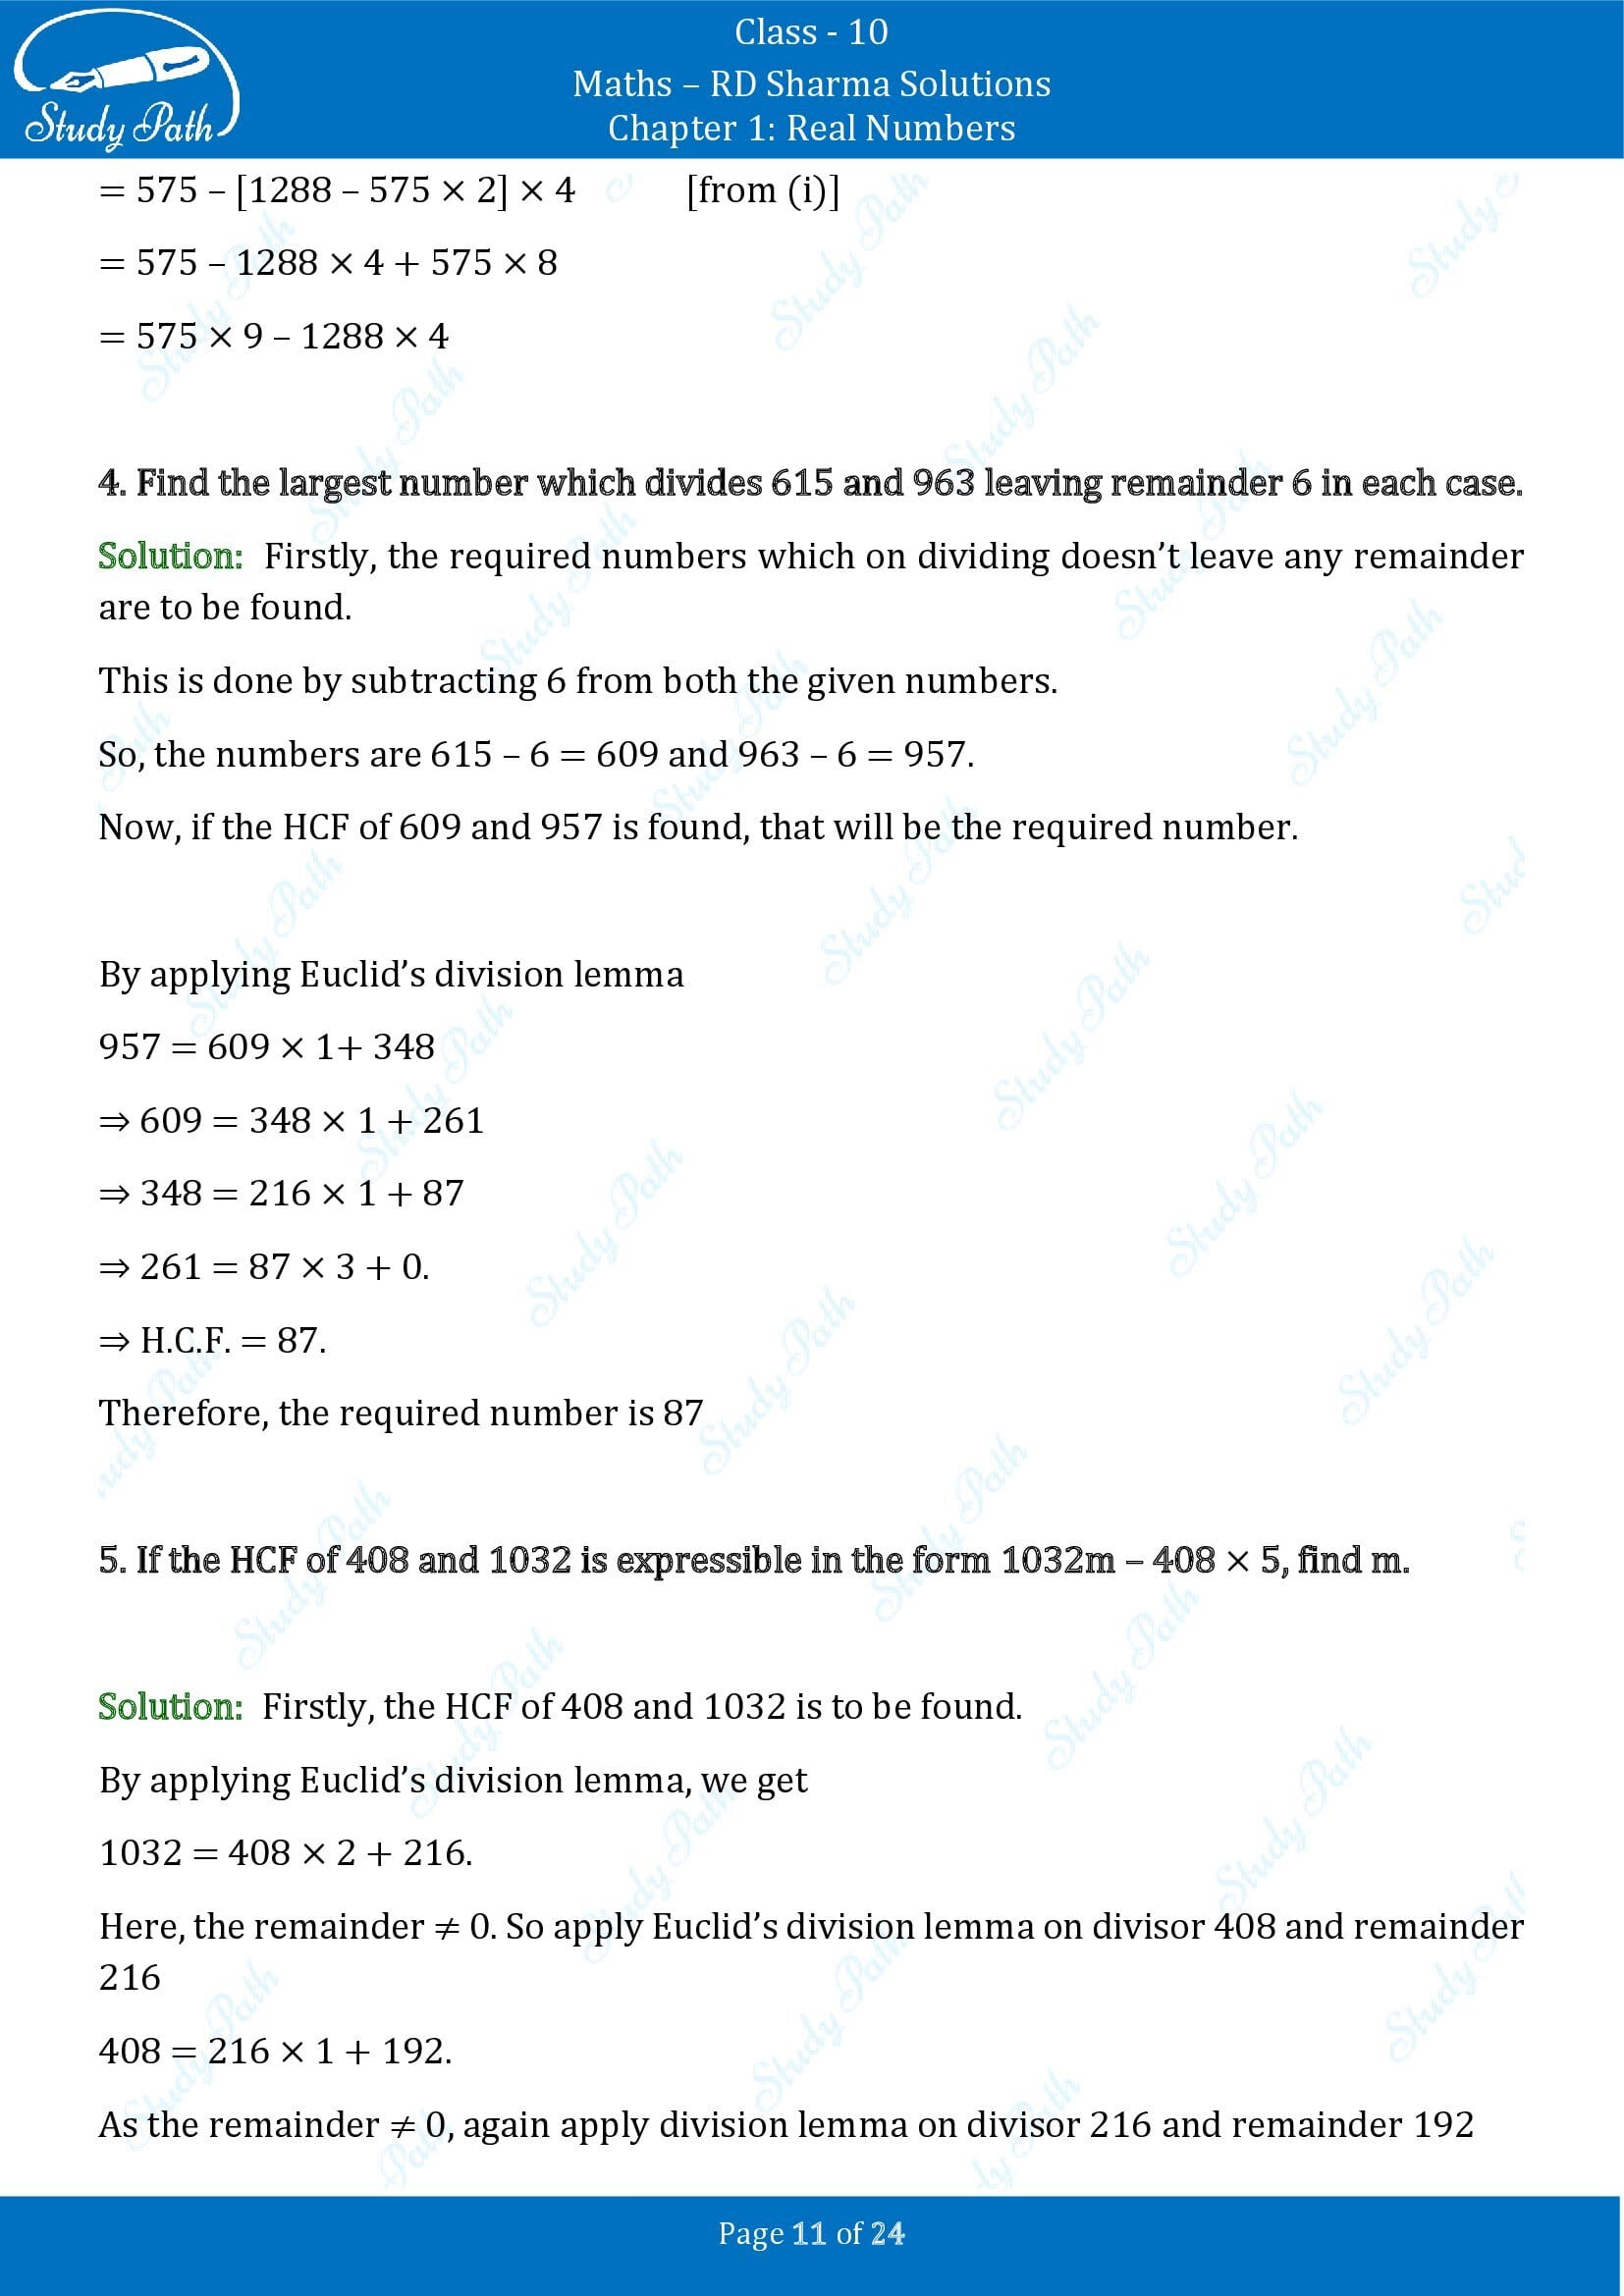 RD Sharma Solutions Class 10 Chapter 1 Real Numbers Exercise 1.2 00011